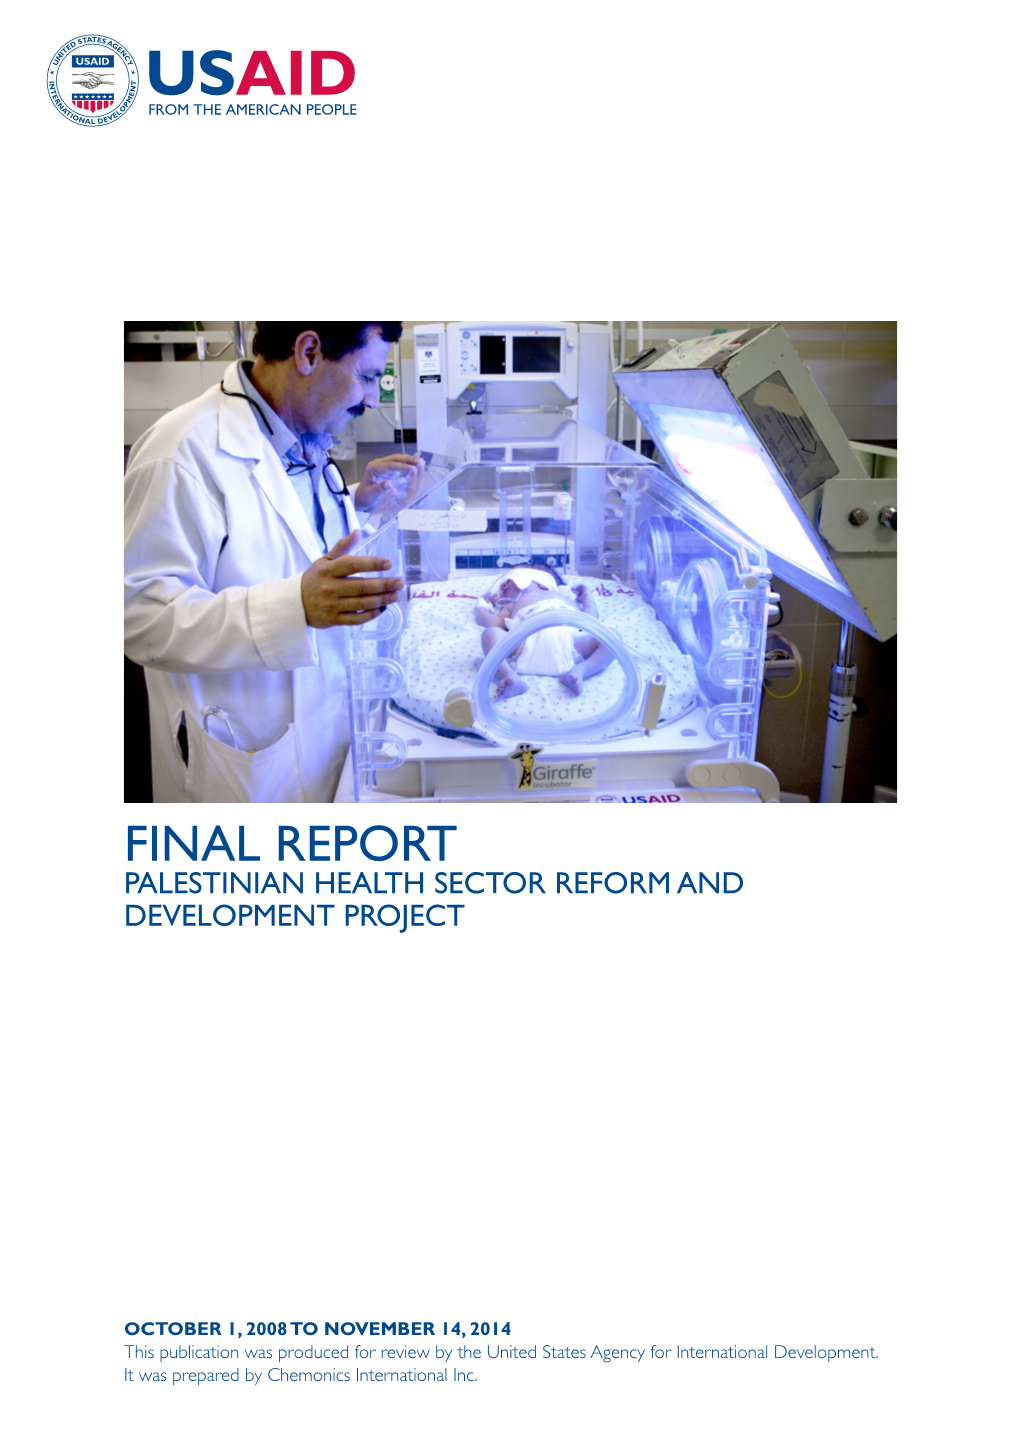 Final Report: Palestinian Health Sector Reform and Development Project